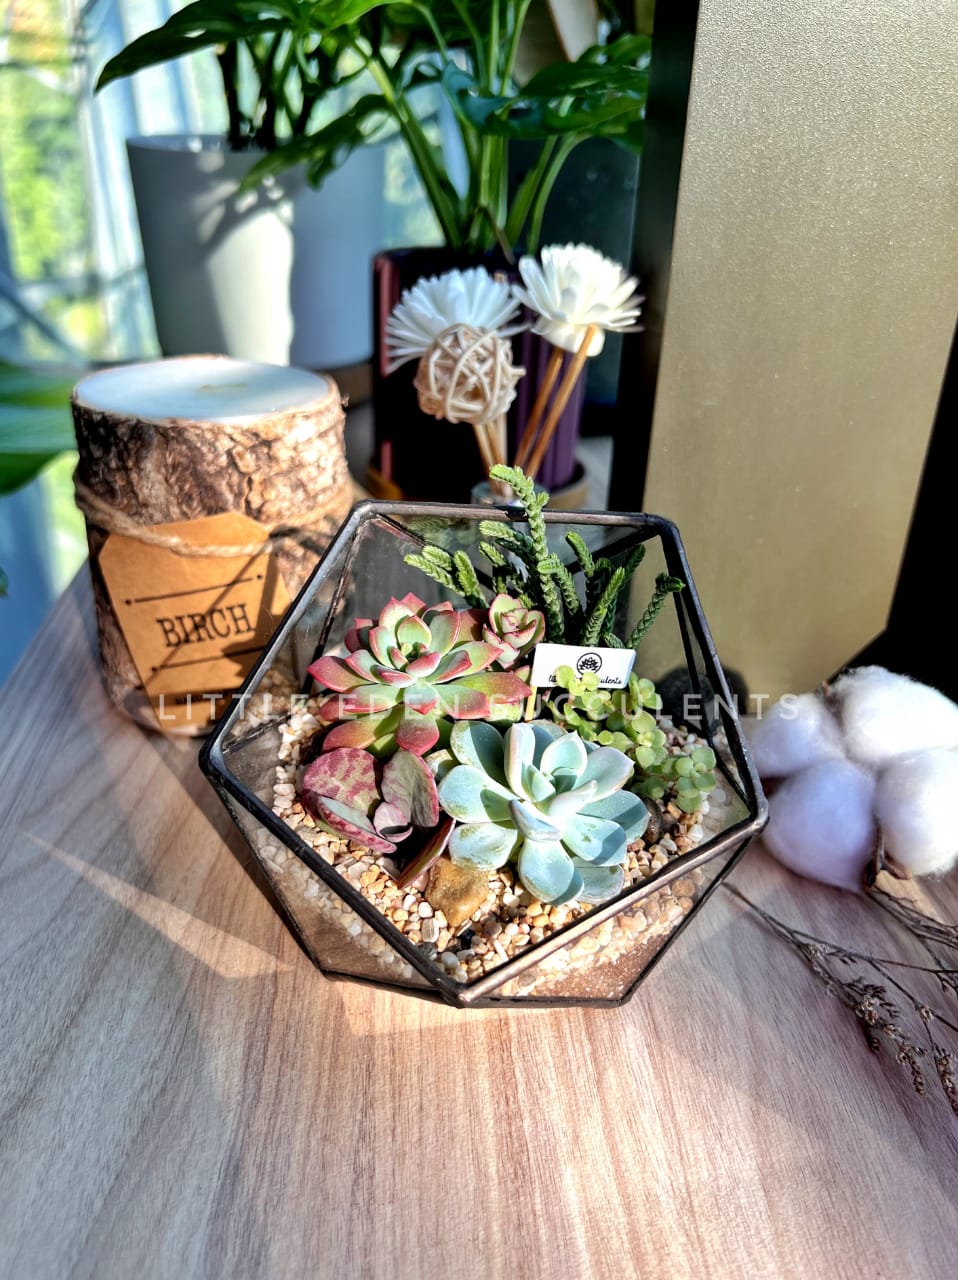 What to do when the succulents outgrown from the terrarium glass?